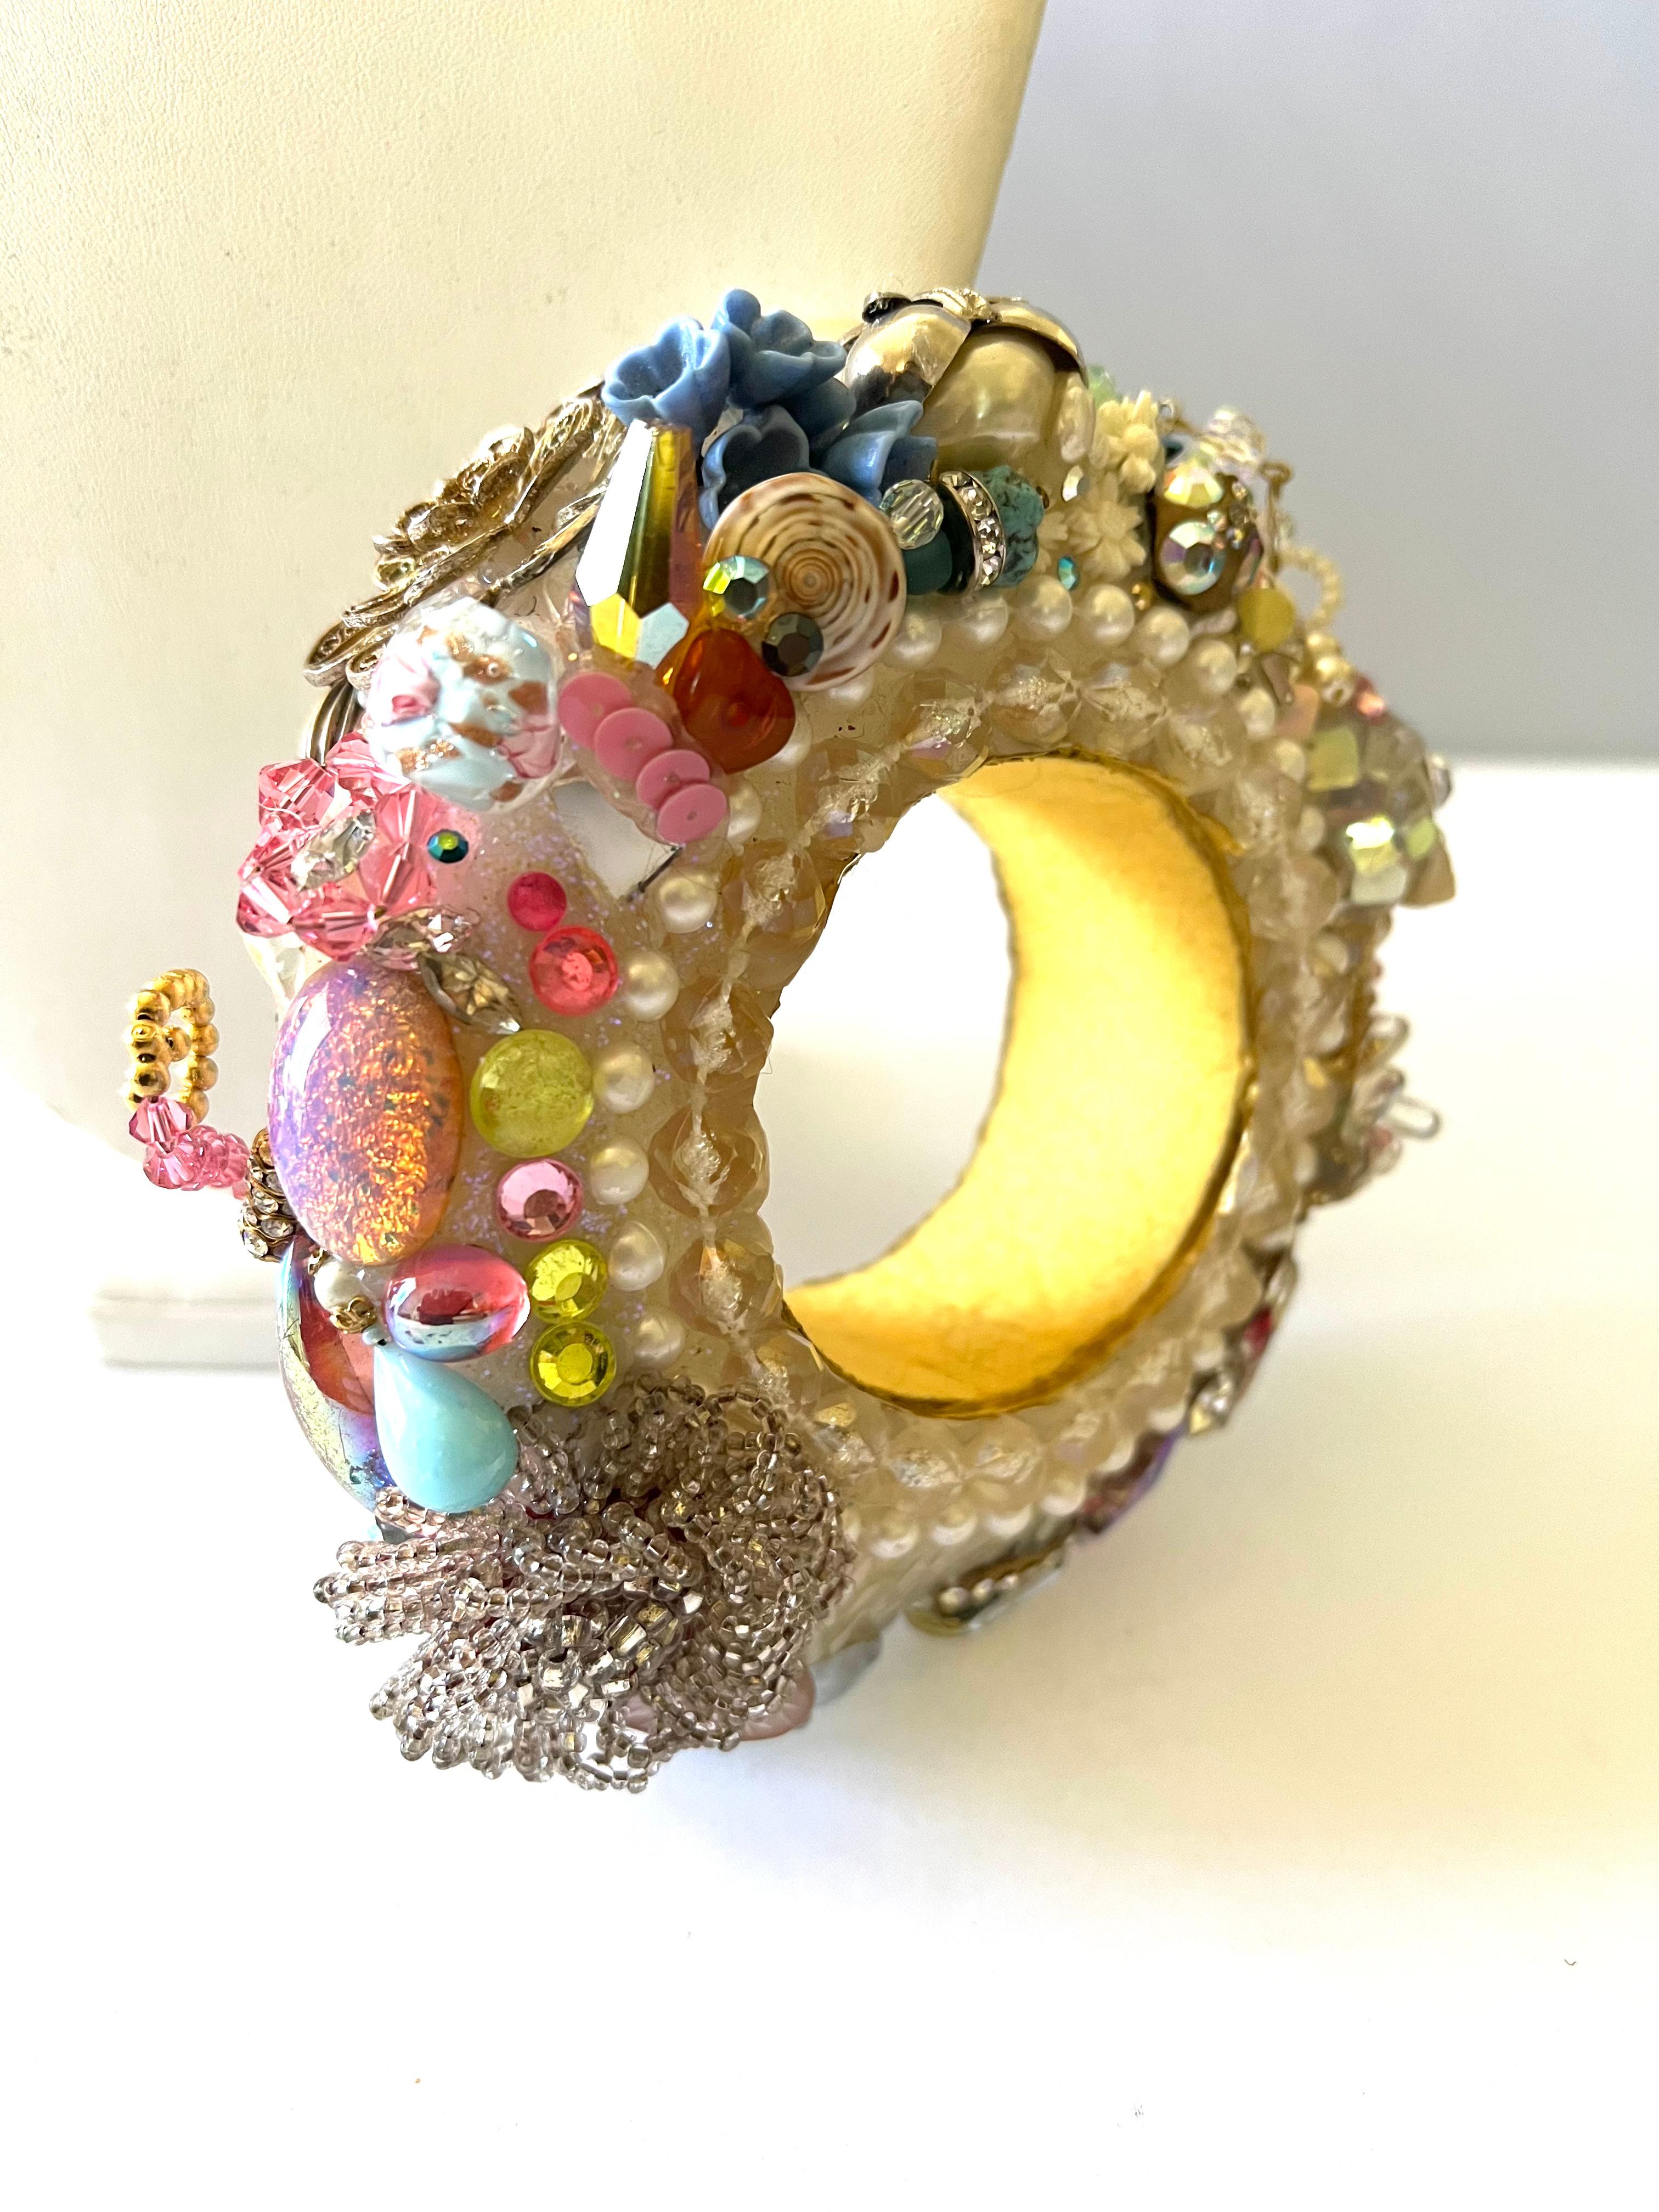 Scarce and highly collectible Christian Lacroix ornate bangle bracelet, adorned by ab crystals, faux pearls, pink glass stones, and silver-tone metal findings. Christian Lacroix defile Pret-a-Porter Spring 1995. Please see the last image for